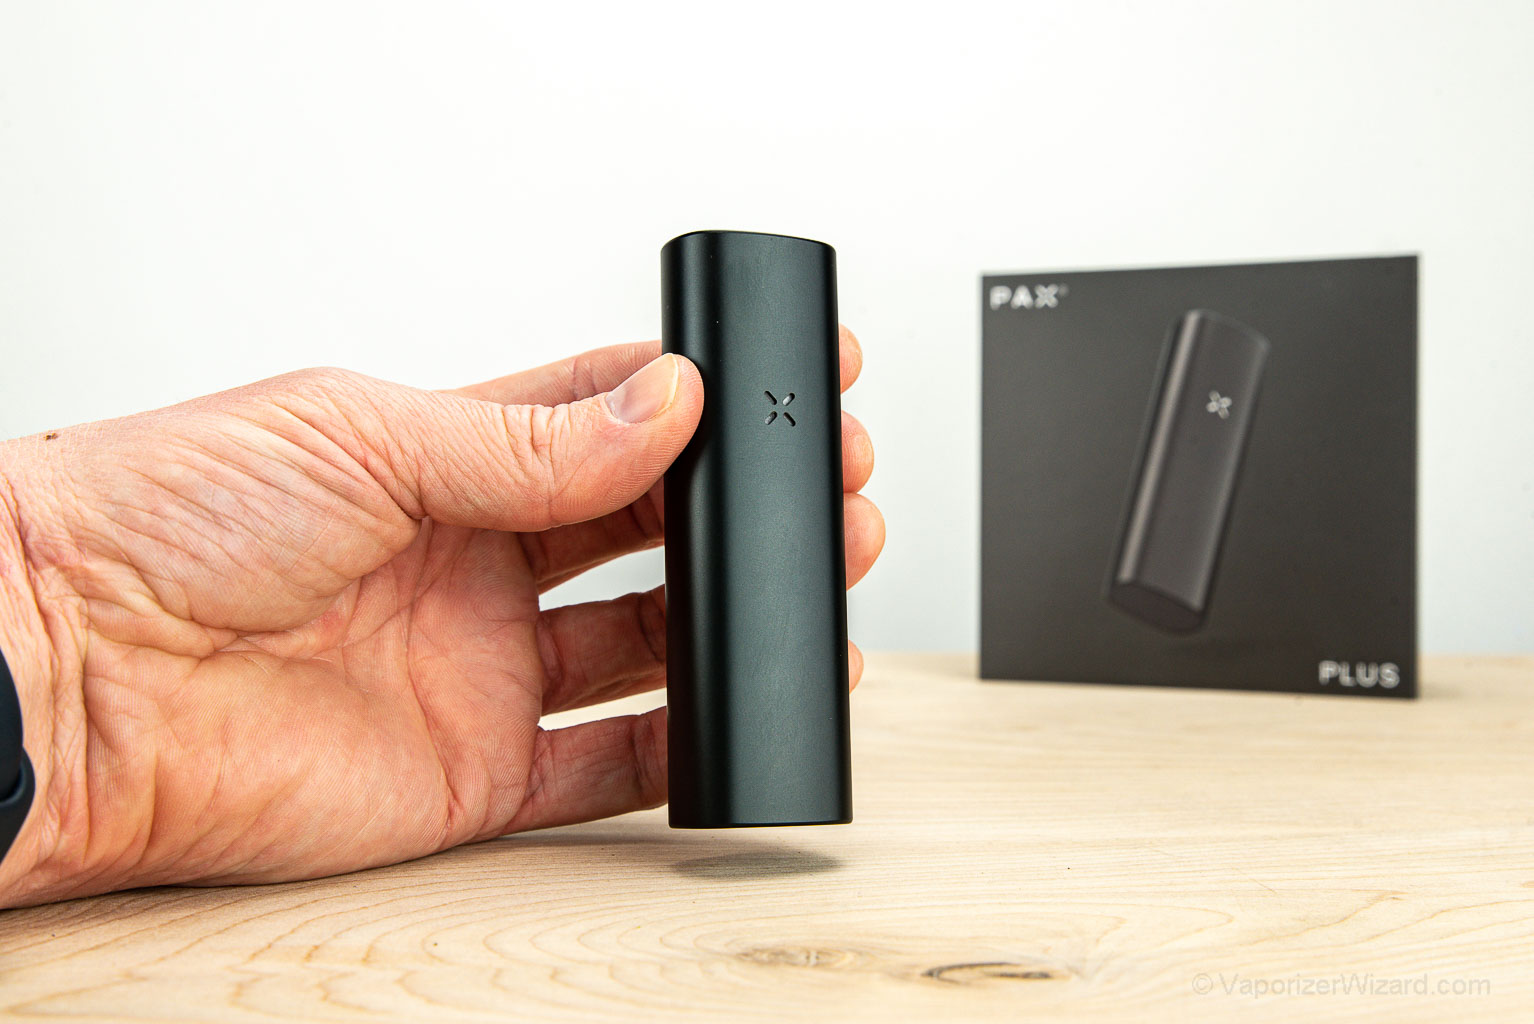 PAX Mini Review, A Perfect Dry Herb Vaporizer For Beginners